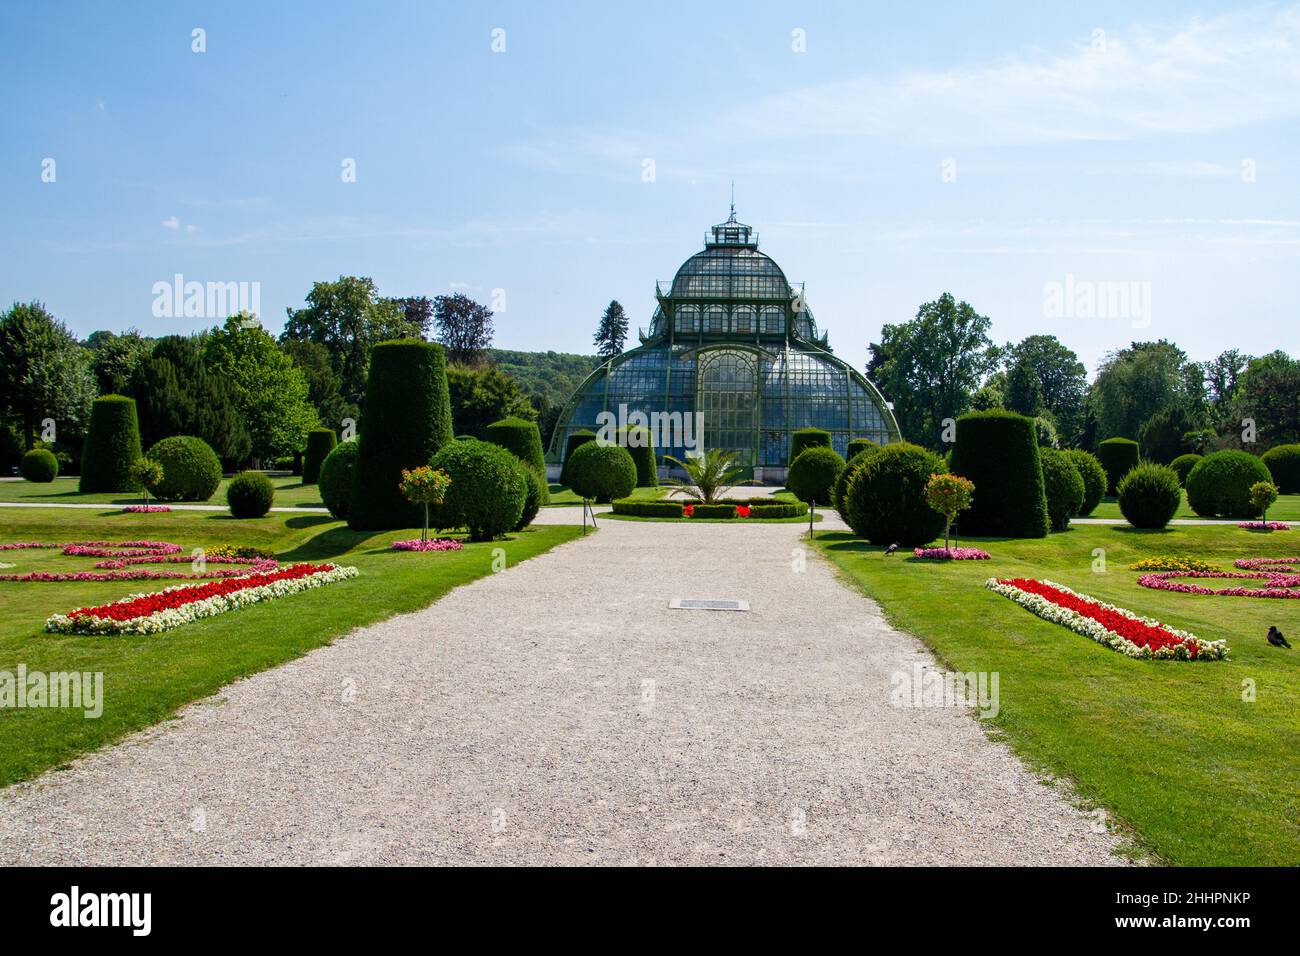 Vienna, Austria, July 22, 2021. The Palmenhaus Schonbrunn is a large greenhouse with plants from all over the world. There are four greenhouses in tot Stock Photo